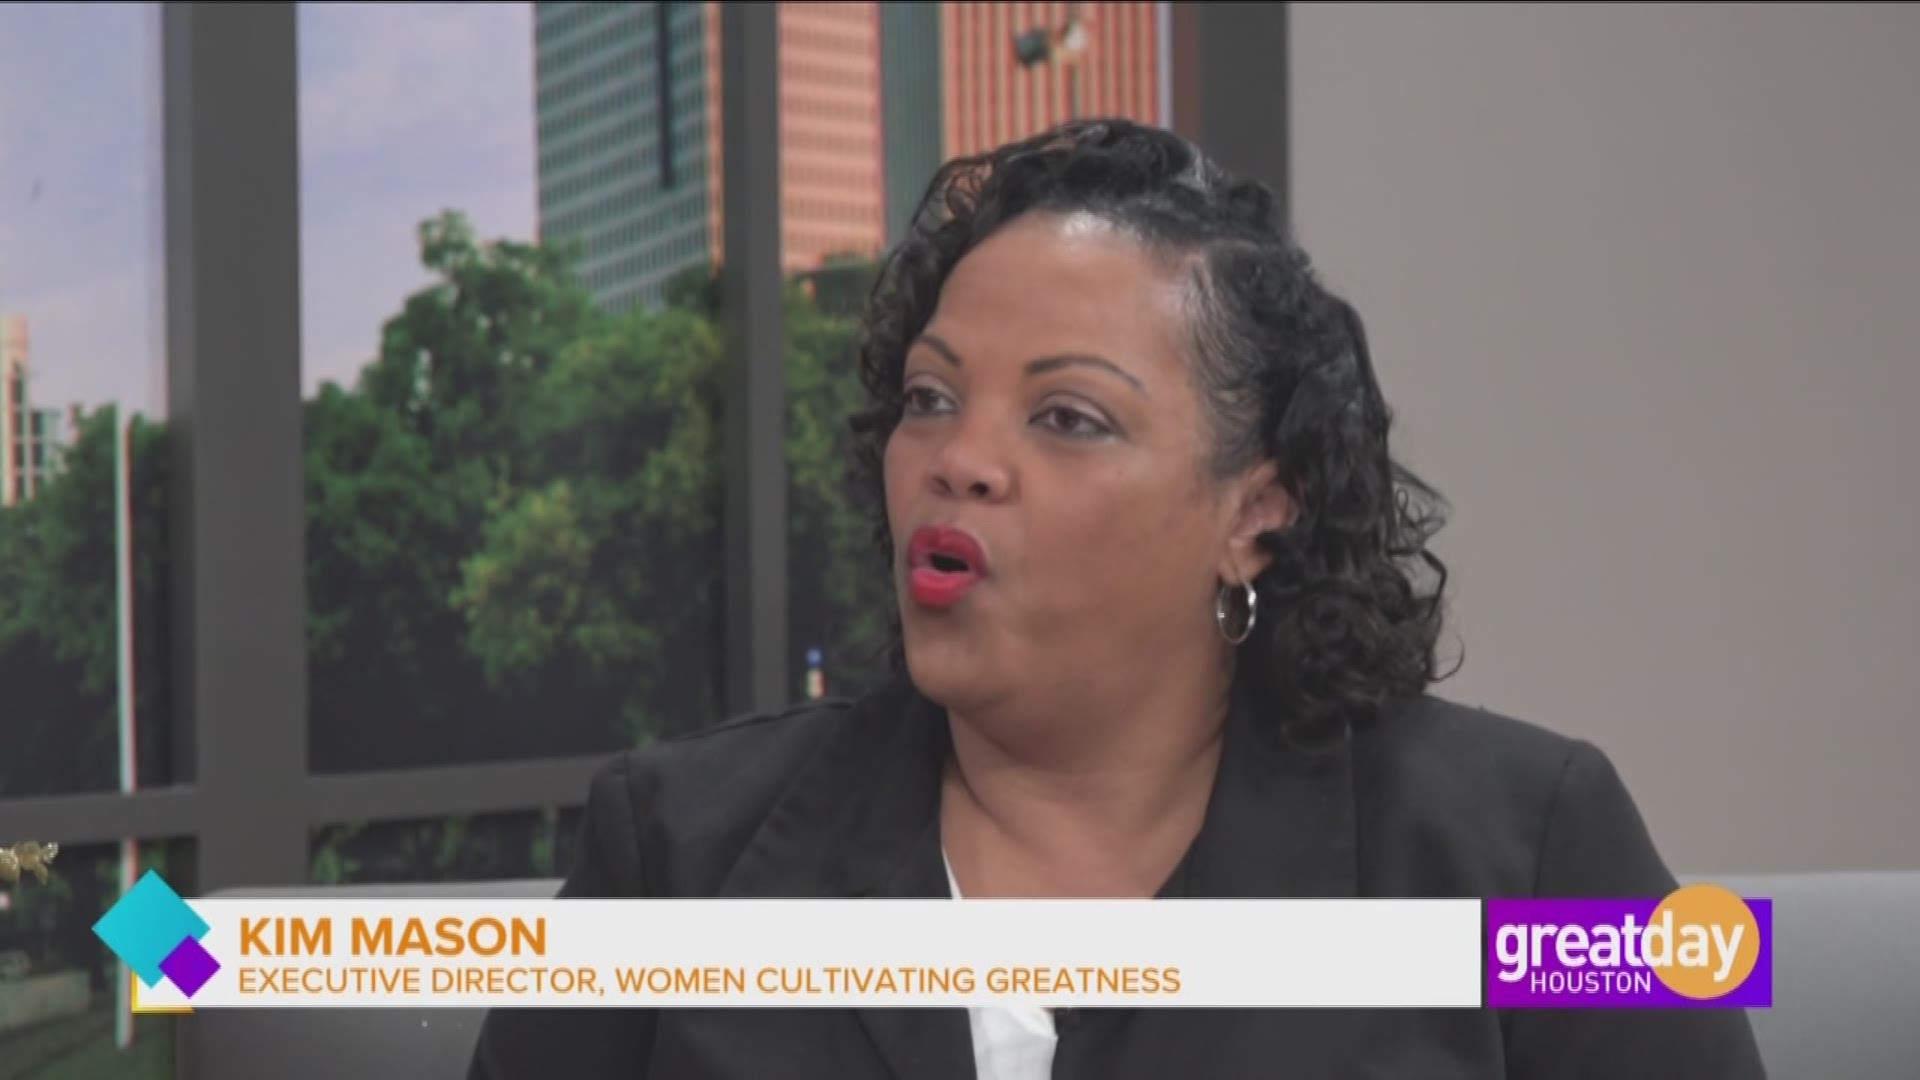 Kim Mason, Executive Director of Women Cultivating Greatness chats with Deborah Duncan about their new program coming in January 2020.